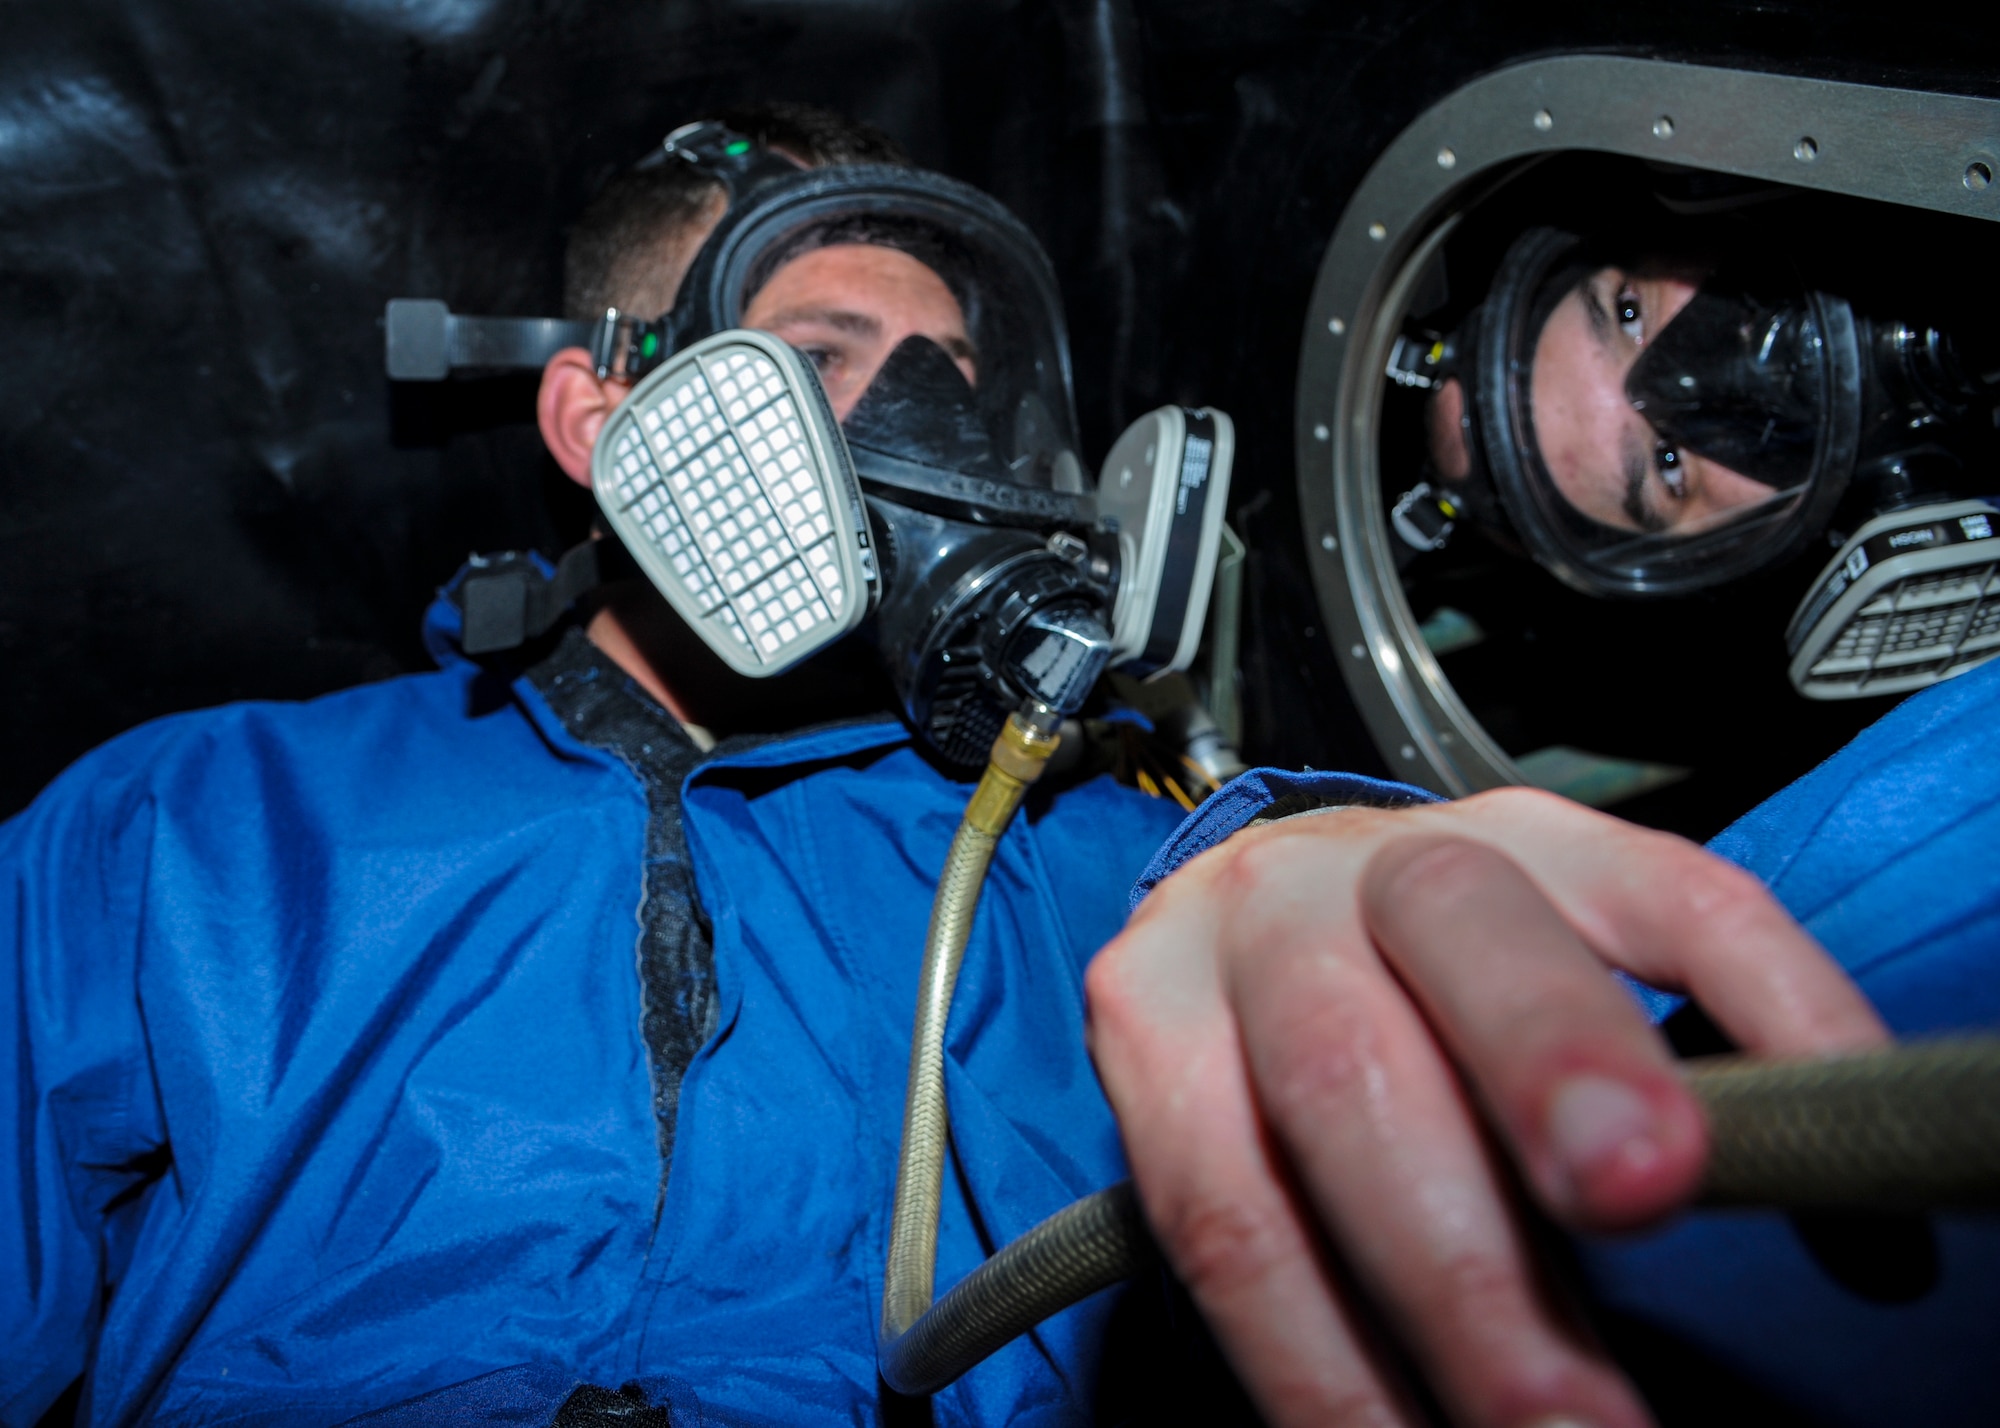 Senior Airman Taylor Weishaar, a 19th Maintenance Group fuels system repair technician, looks for corrosion or deterioration on the inside of a fuel tank May 27, 2014, at Little Rock Air Force Base, Ark. Even when empty, the air inside fuel tanks can be harmful, so respirators are required. (U.S. Air Force photo by Airman 1st Class Harry Brexel)